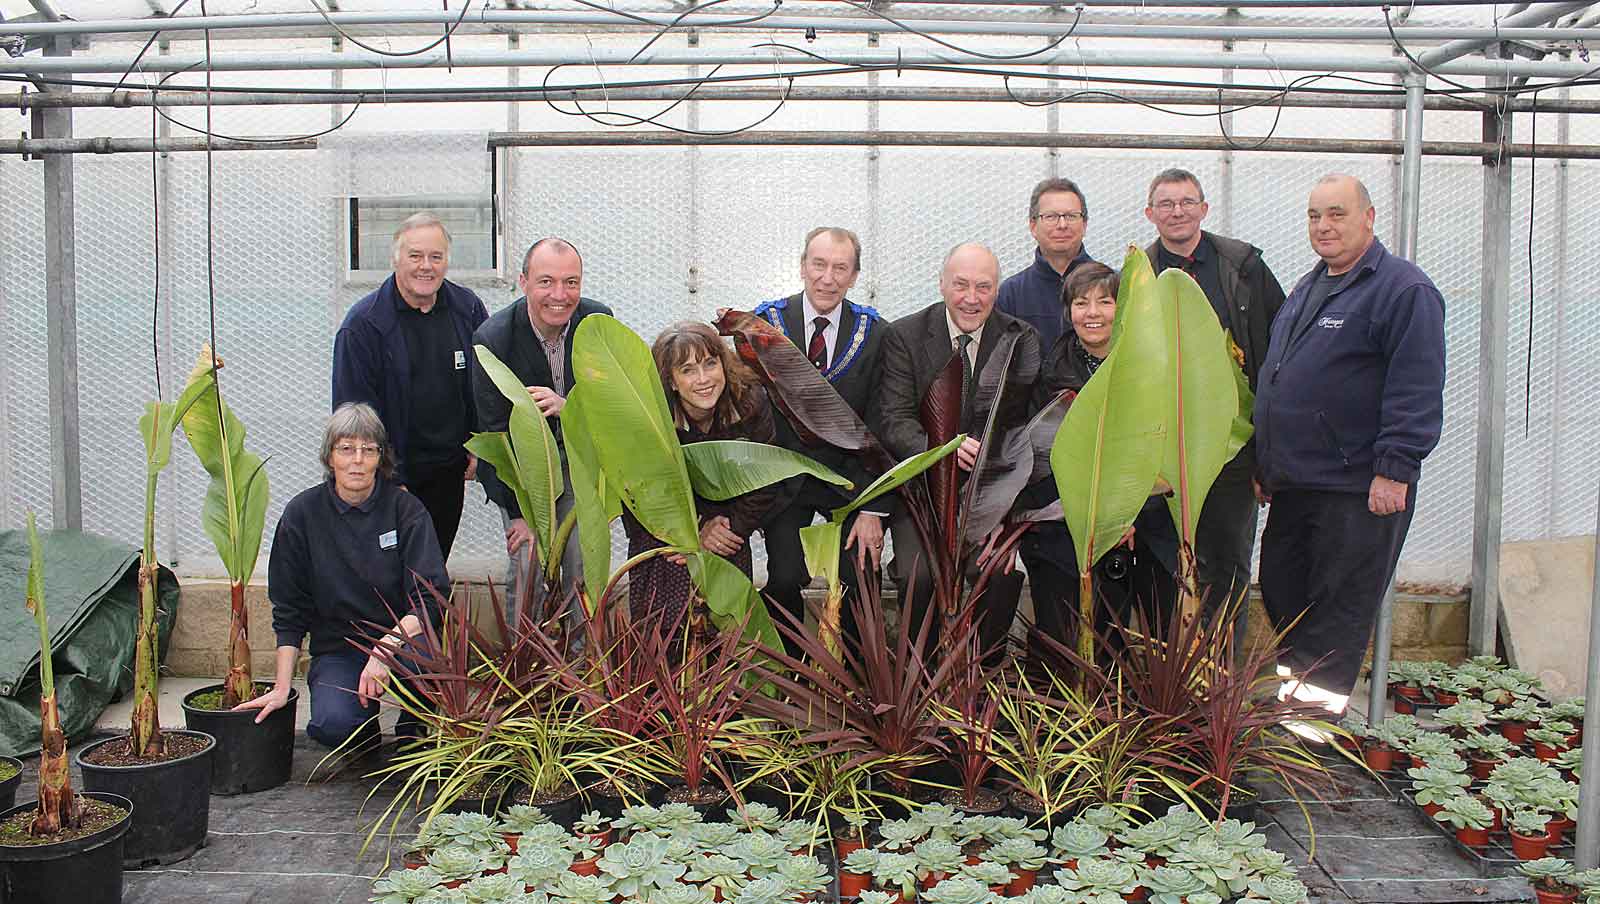 (left to right): Penny Anderson, Harrogate Borough Council’s (HBC) Chief Propagator; Barrie Stringer, Harlow Hill Nursery Operations Manager; Councillor Richard Cooper, Leader of Harrogate Borough Council; Penny Rowell, Director In Stainless Engineering Ltd; Paul Clarke, Assistant Provincial Grand Master; Doug Mills, Area 3 Provincial Charity Assistant; Andy Ladds Nurseryman; Sue Wood, HBC Horticultural Officer; Peter Dodds, Treasurer The Spa Lodge; Adrian Chalmers, Nurseryman